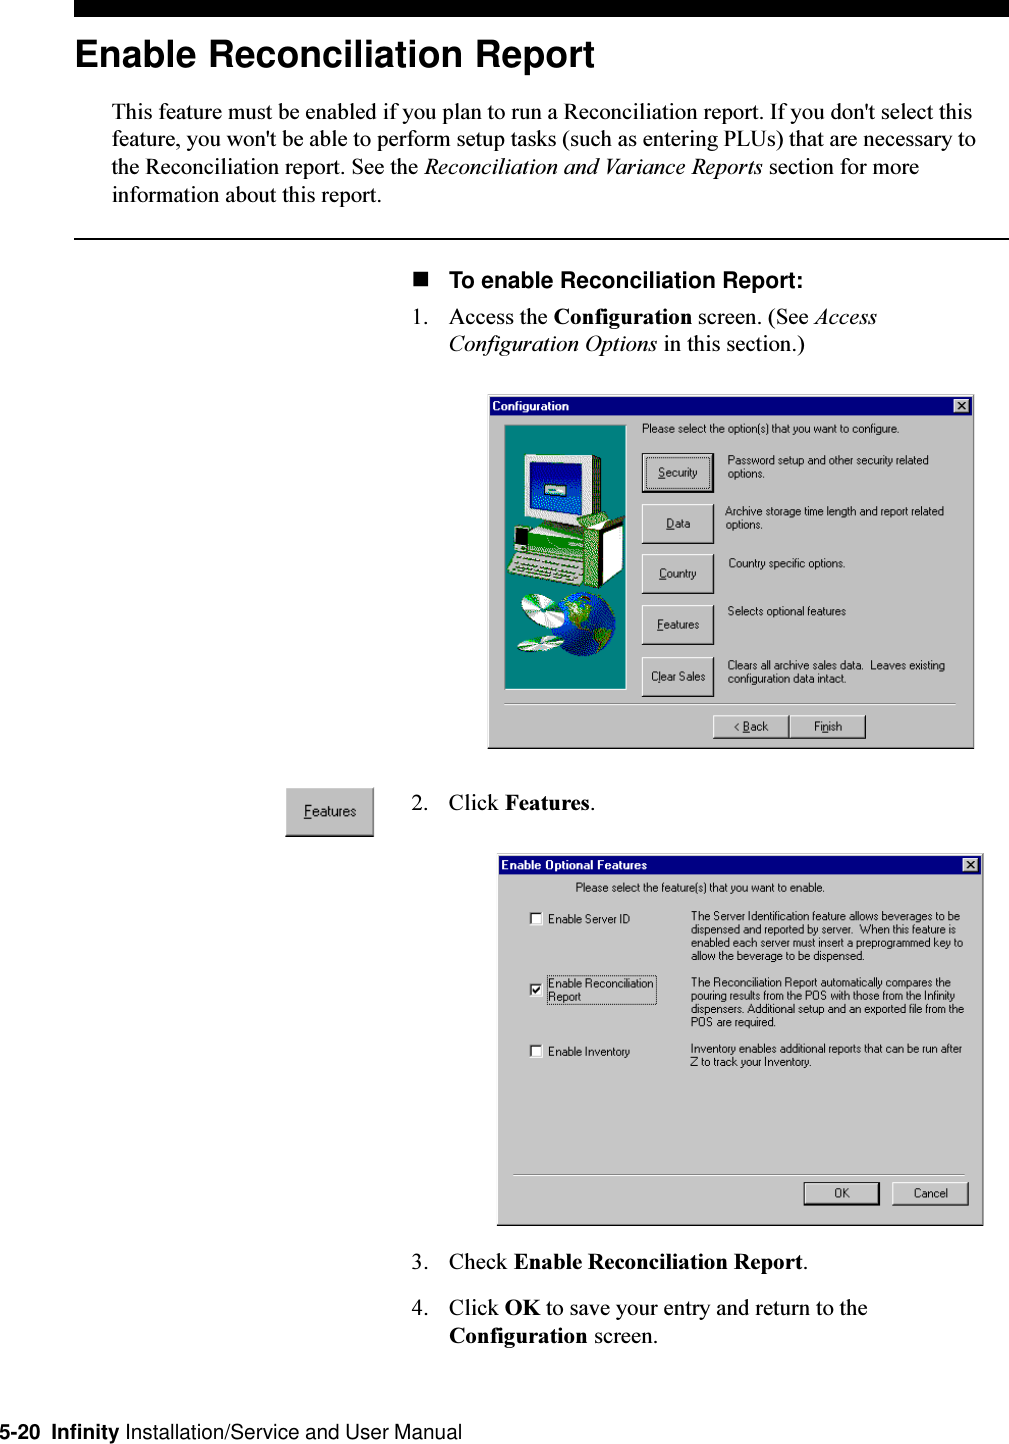 5-20  Infinity Installation/Service and User ManualEnable Reconciliation ReportThis feature must be enabled if you plan to run a Reconciliation report. If you don&apos;t select thisfeature, you won&apos;t be able to perform setup tasks (such as entering PLUs) that are necessary tothe Reconciliation report. See the Reconciliation and Variance Reports section for moreinformation about this report.nTo enable Reconciliation Report:1. Access the Configuration screen. (See AccessConfiguration Options in this section.)2. Click Features.3. Check Enable Reconciliation Report.4. Click OK to save your entry and return to theConfiguration screen.